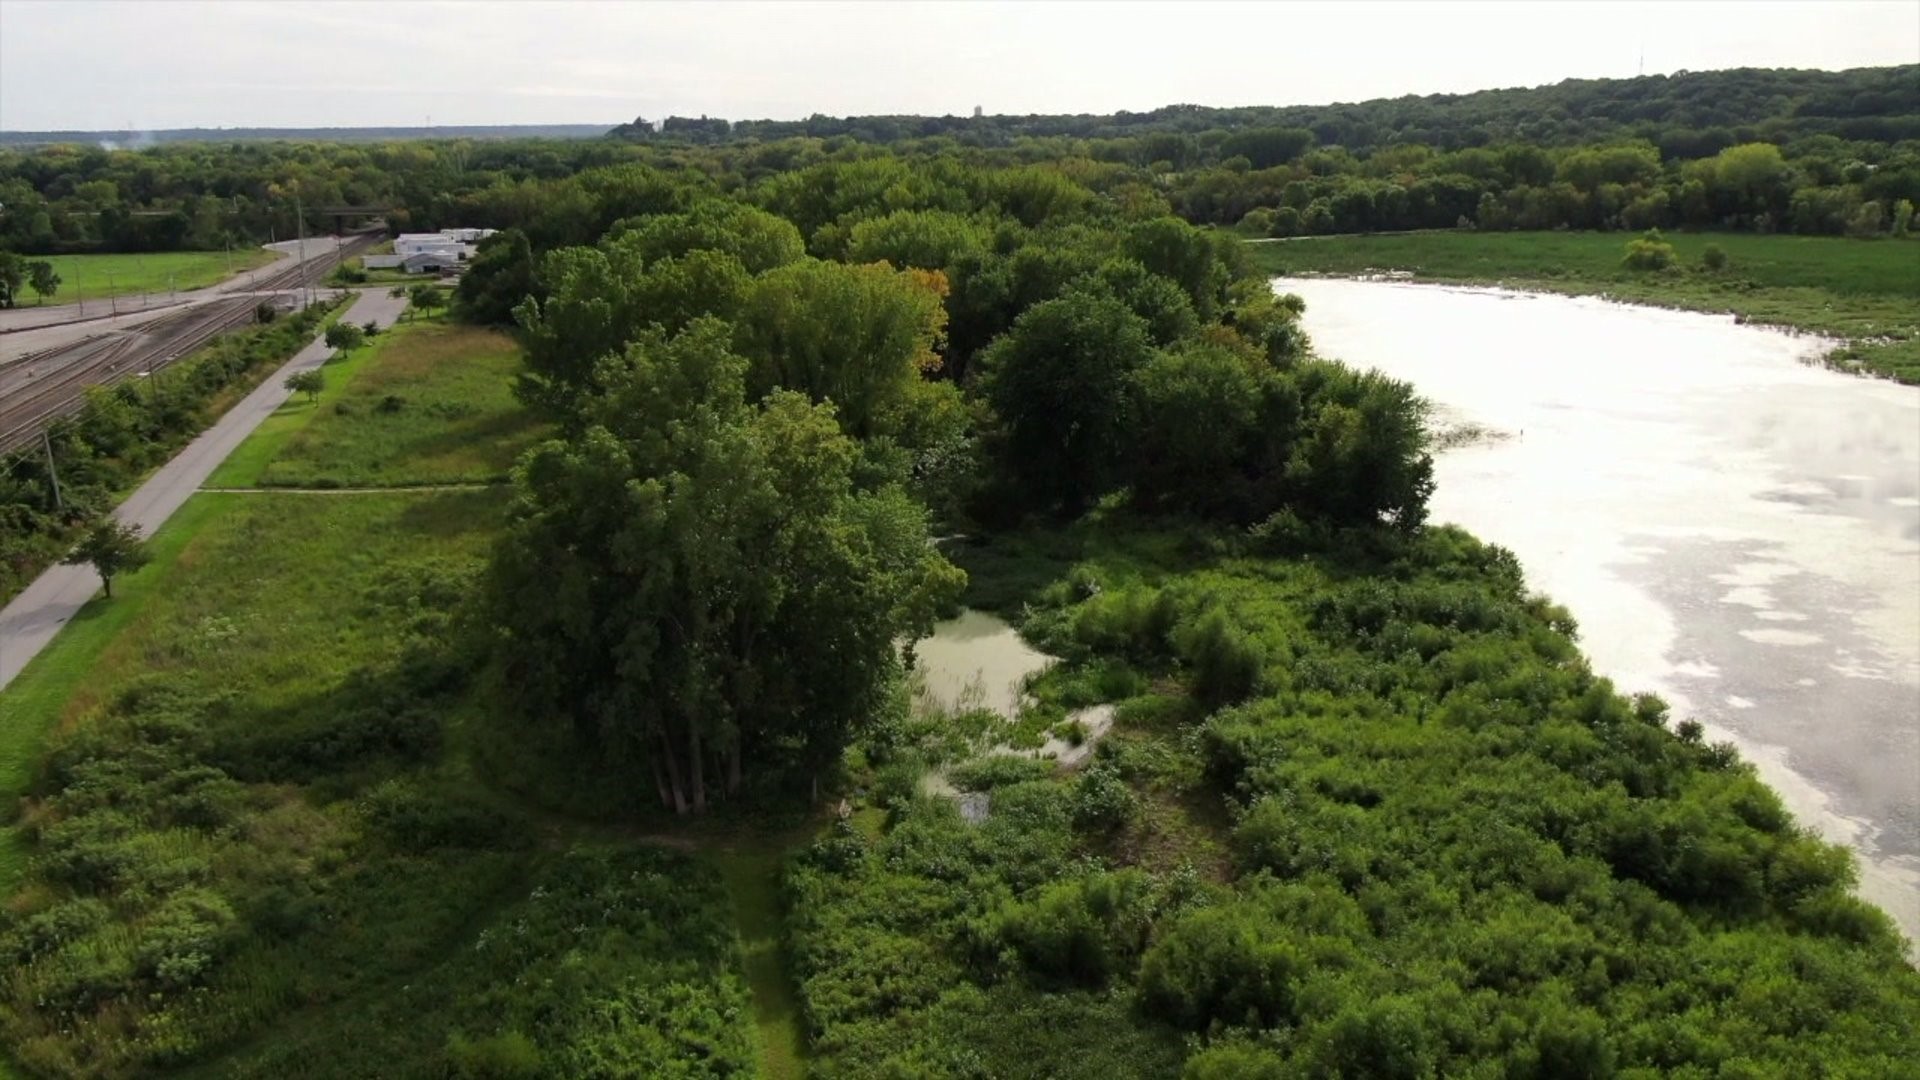 Nahant Marsh recovers after the floods